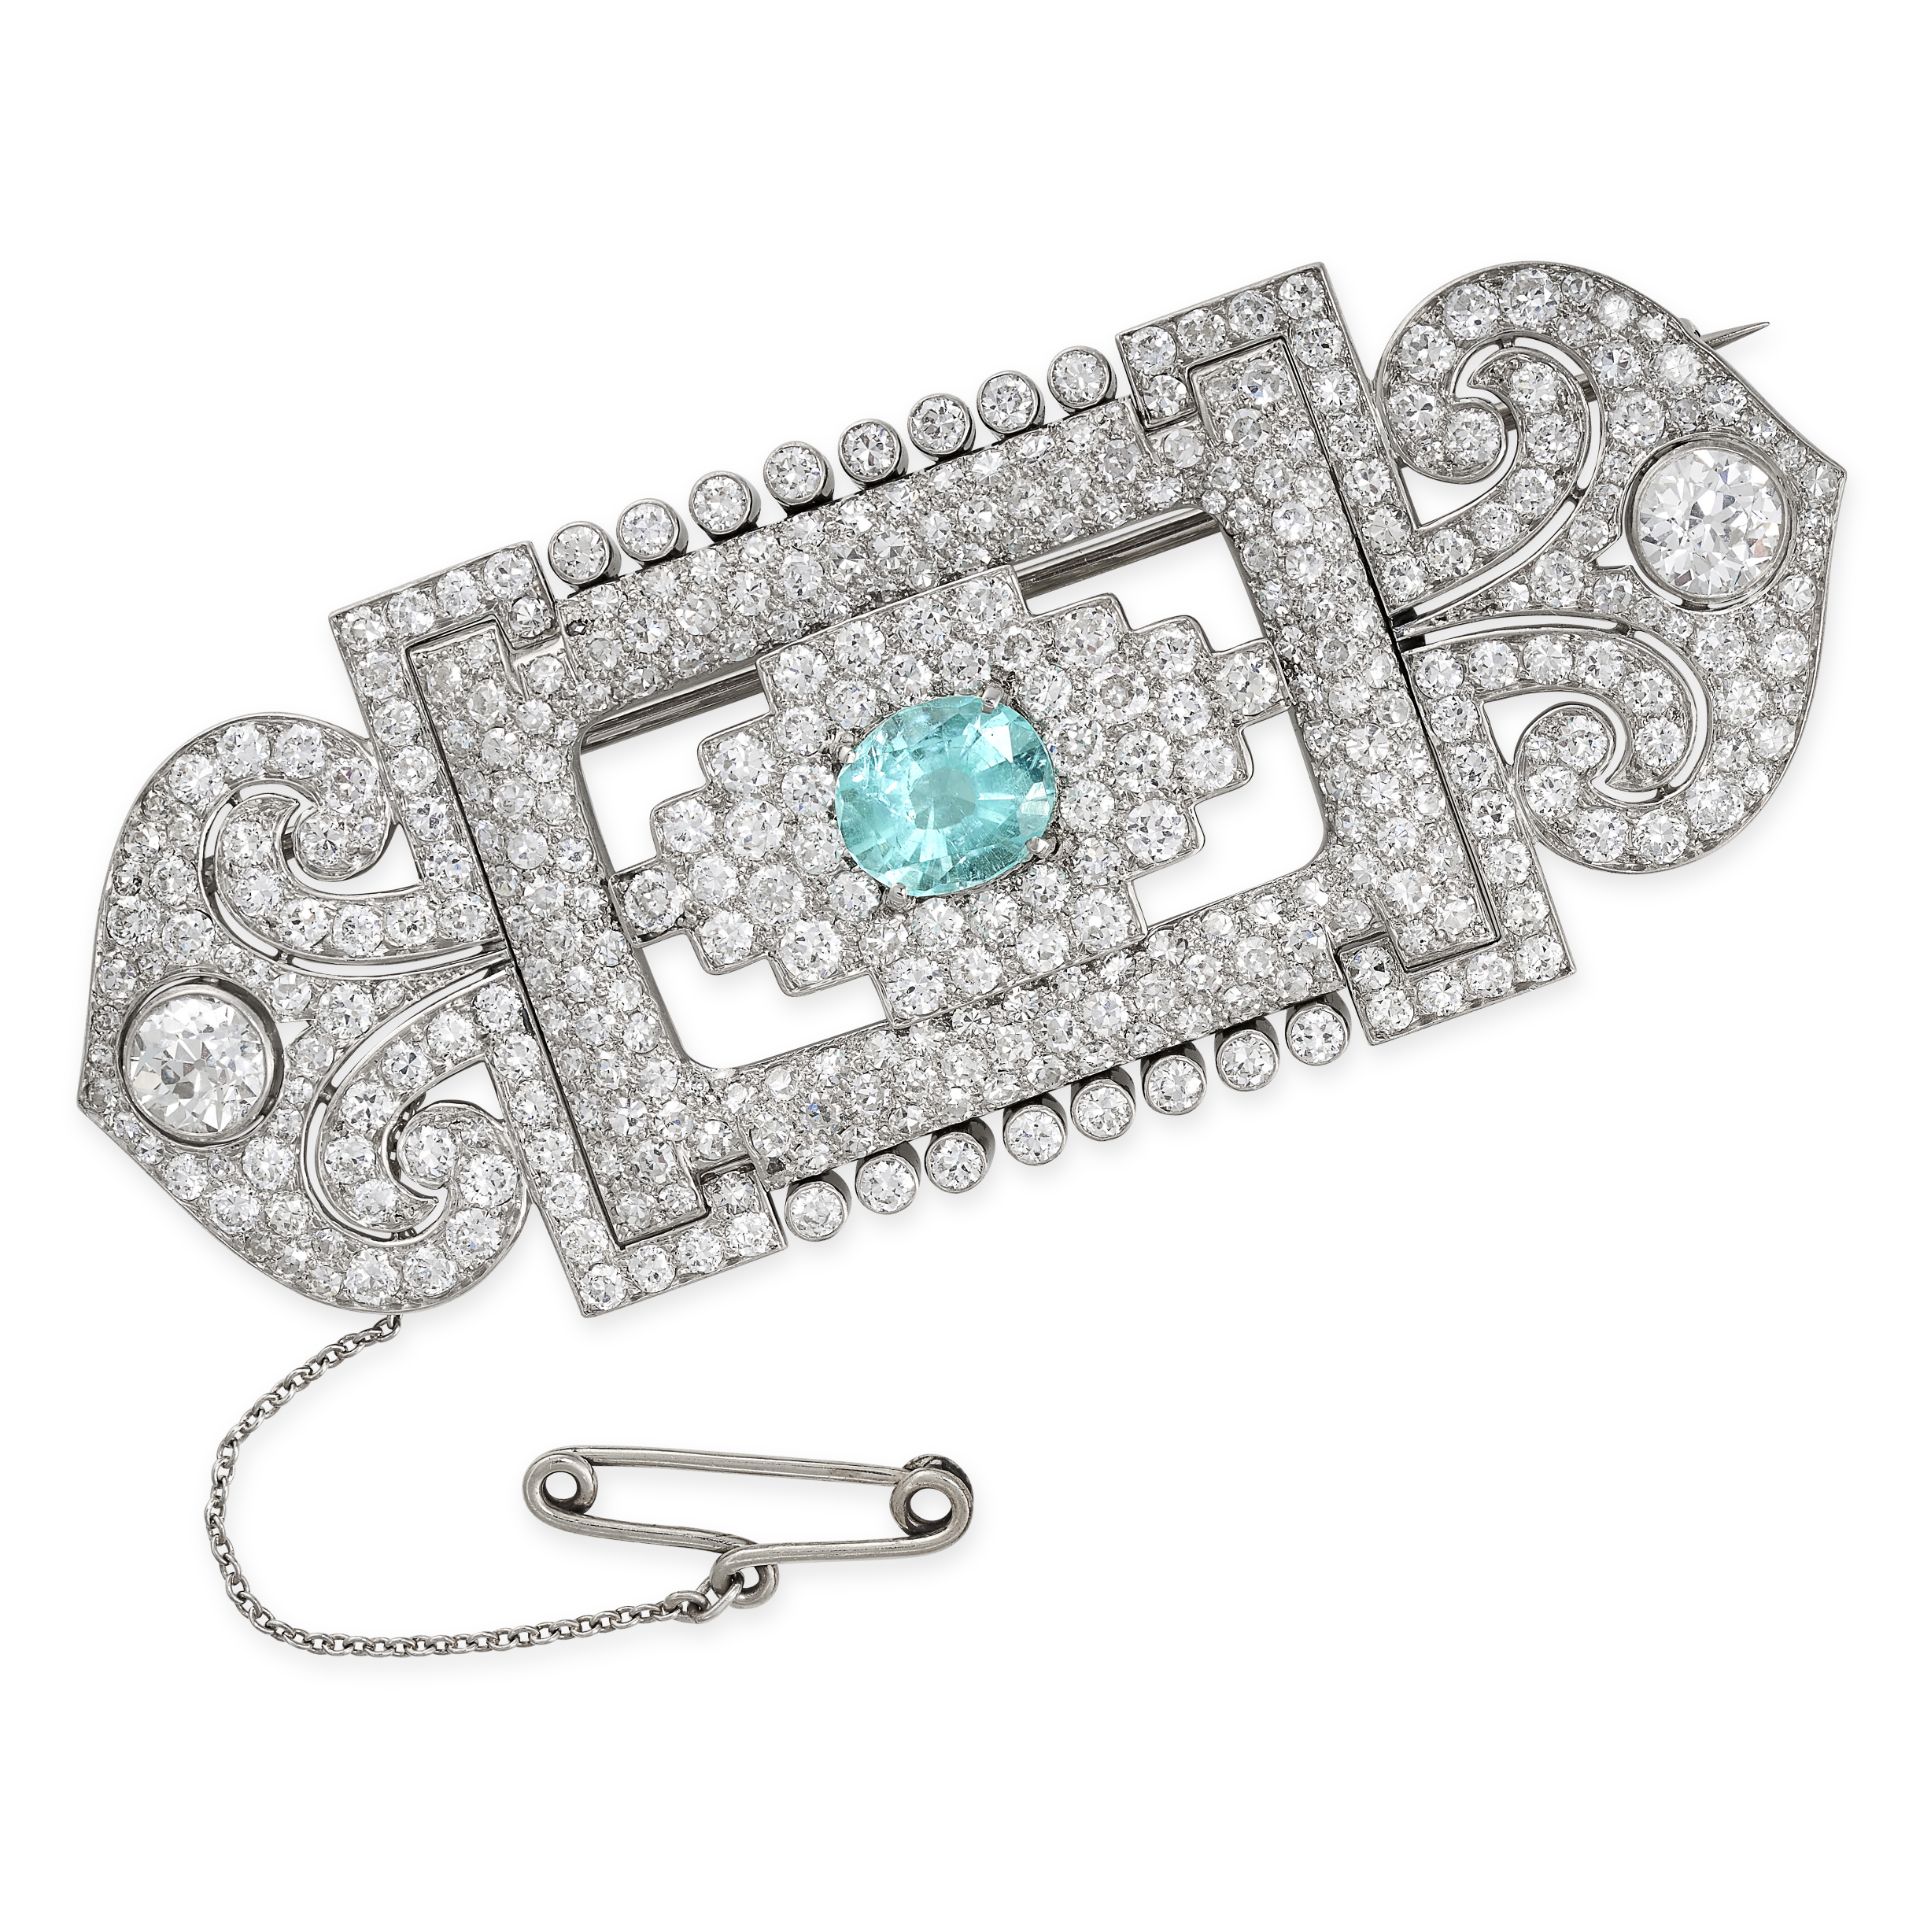 AN EXQUISITE PARAIBA TOURMALINE AND DIAMOND PLAQUE BROOCH set to the centre with a cushion cut